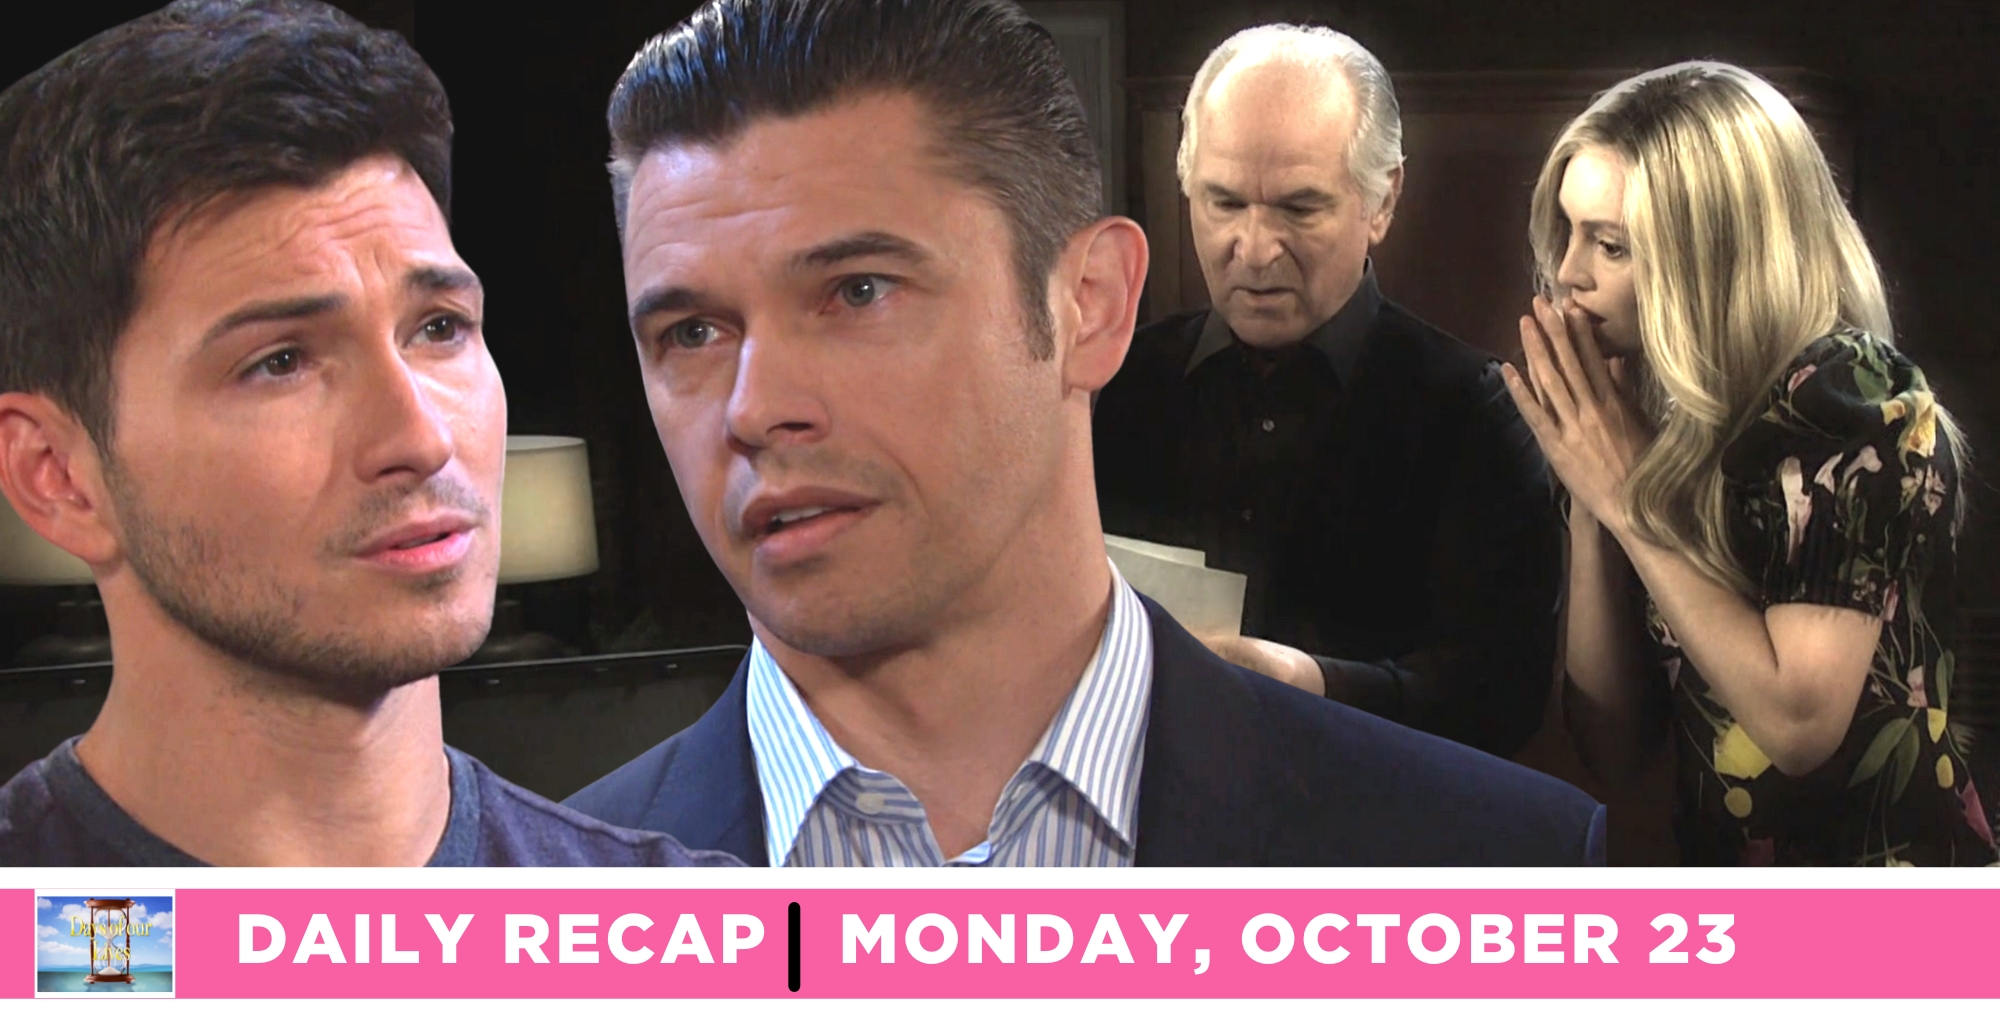 konstantin meleounis and theresa donovan have a secret about victor’s son on days of our lives recap for monday, october 23, 2023.